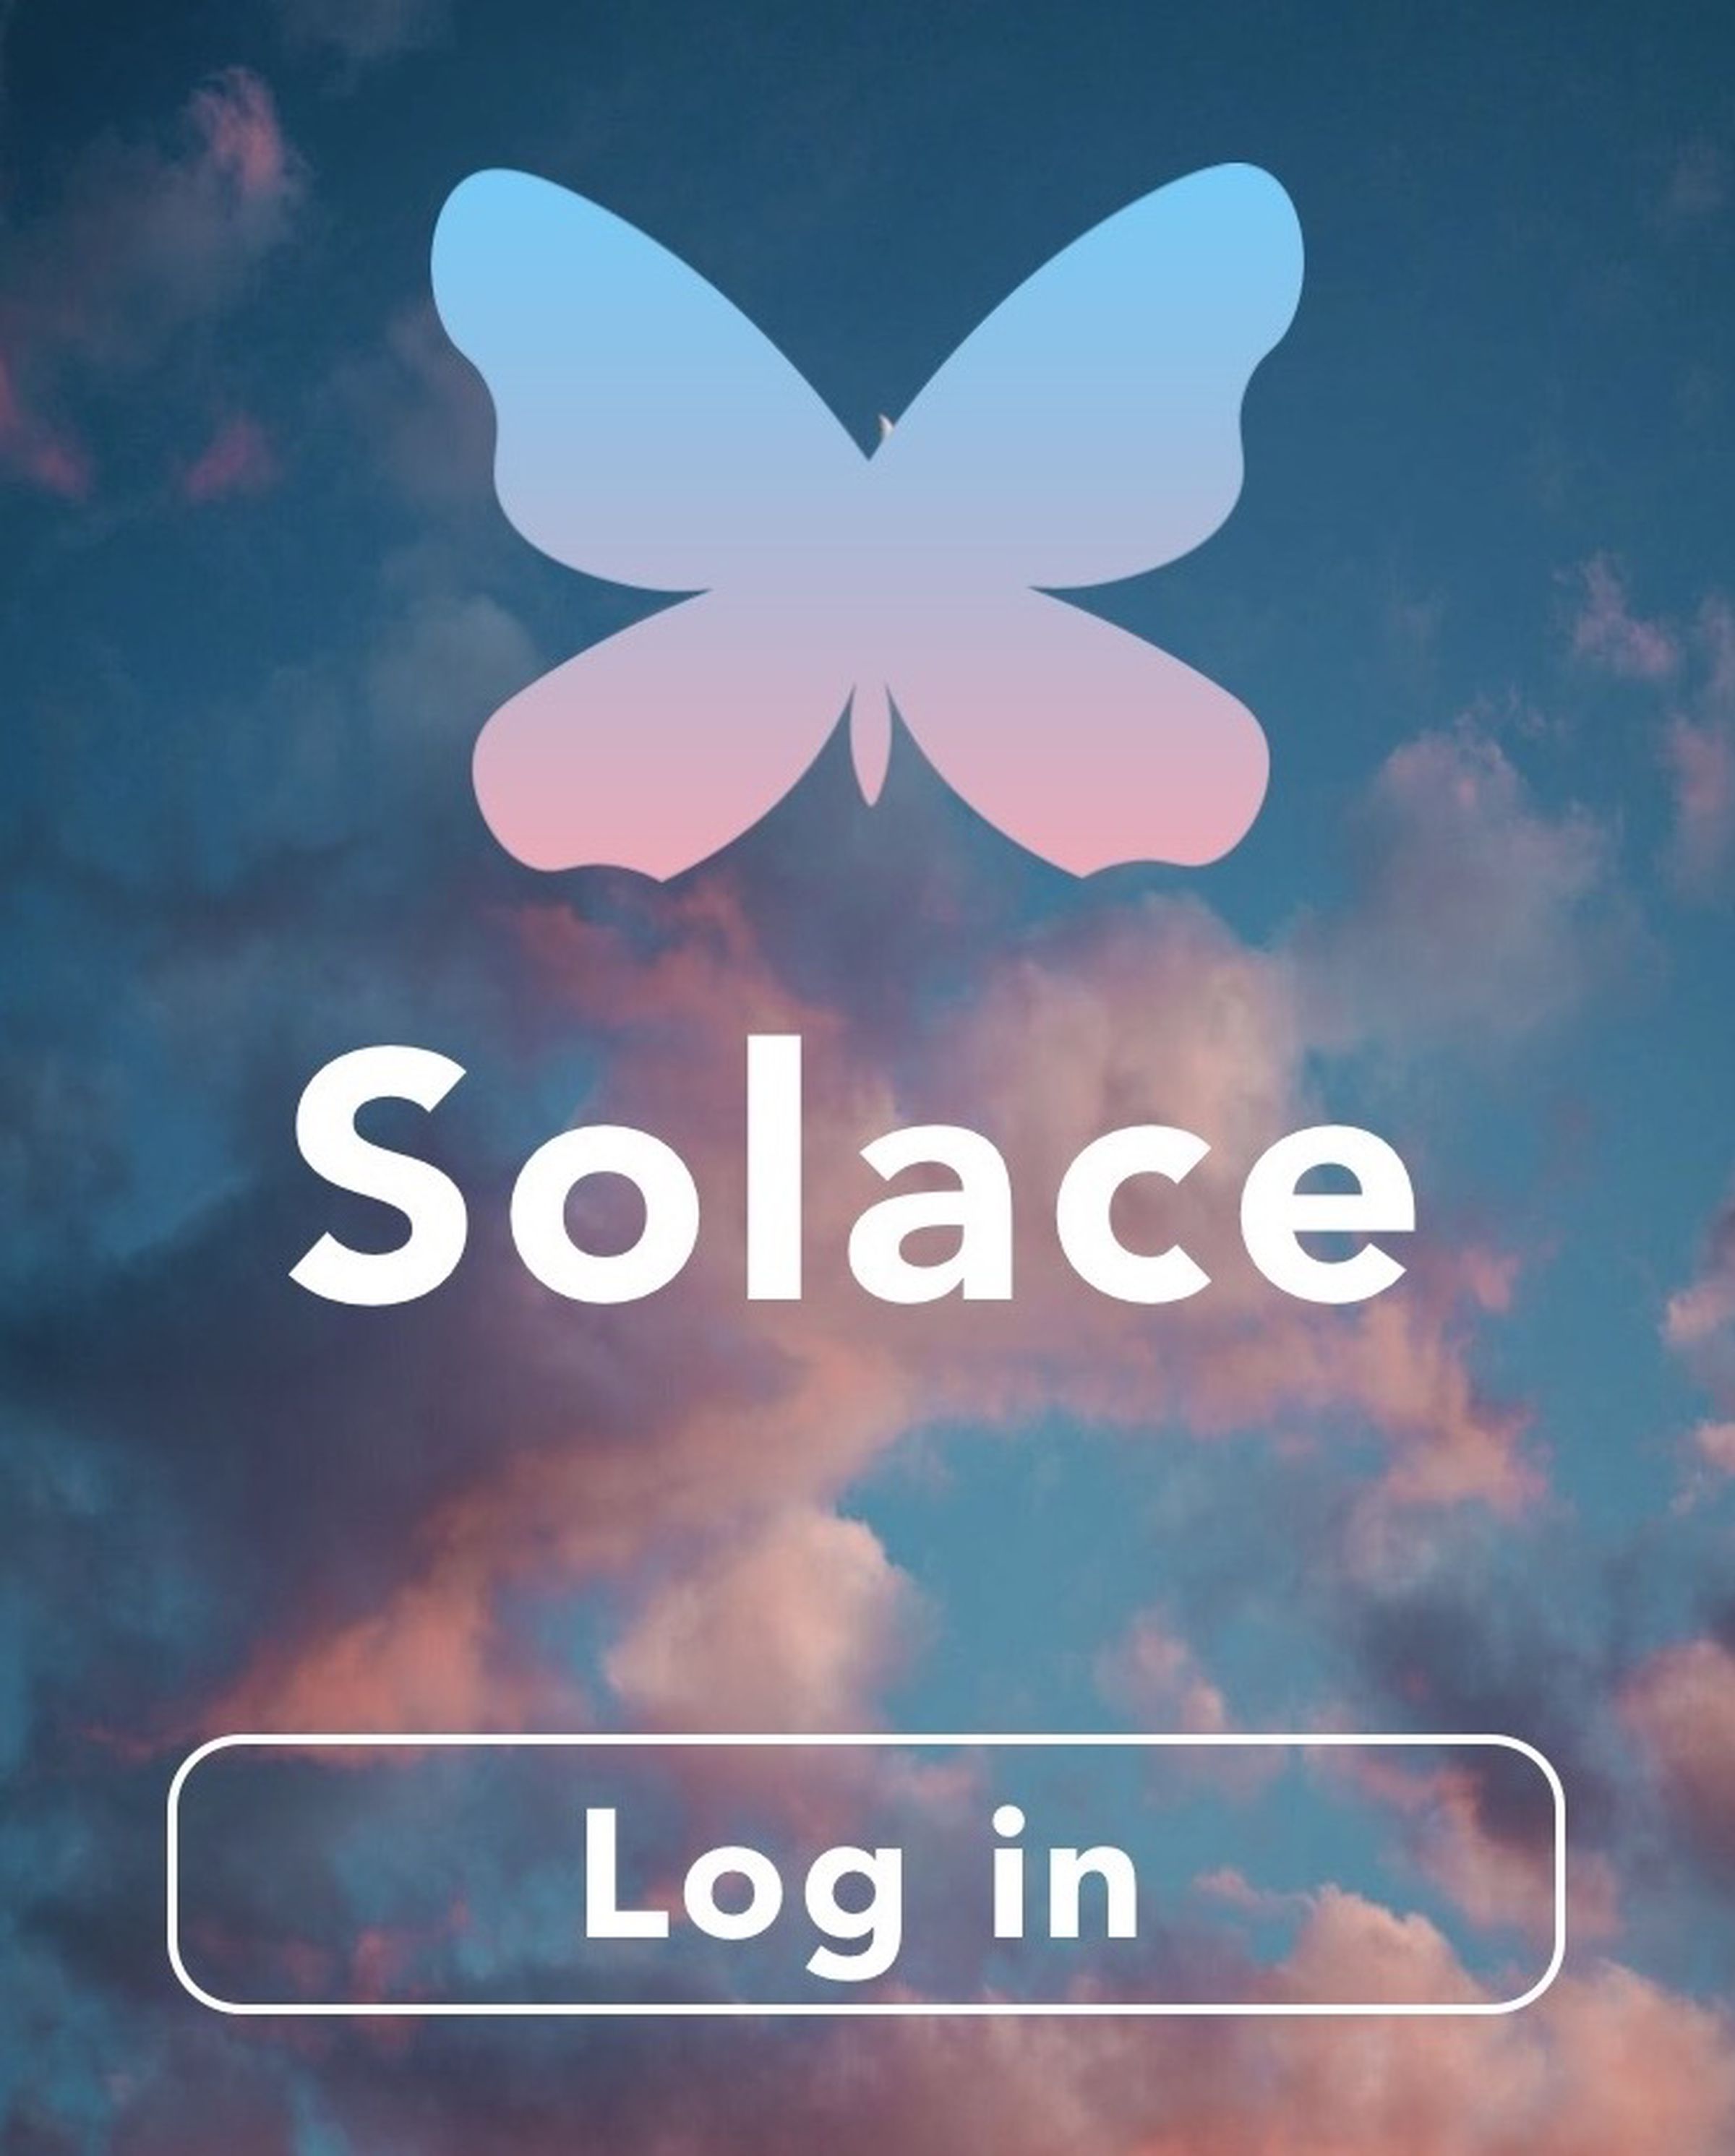 A butterfly logo with a blue to pink gradient above the word Solace and a log in button. The background is a blue sky with pink clouds.